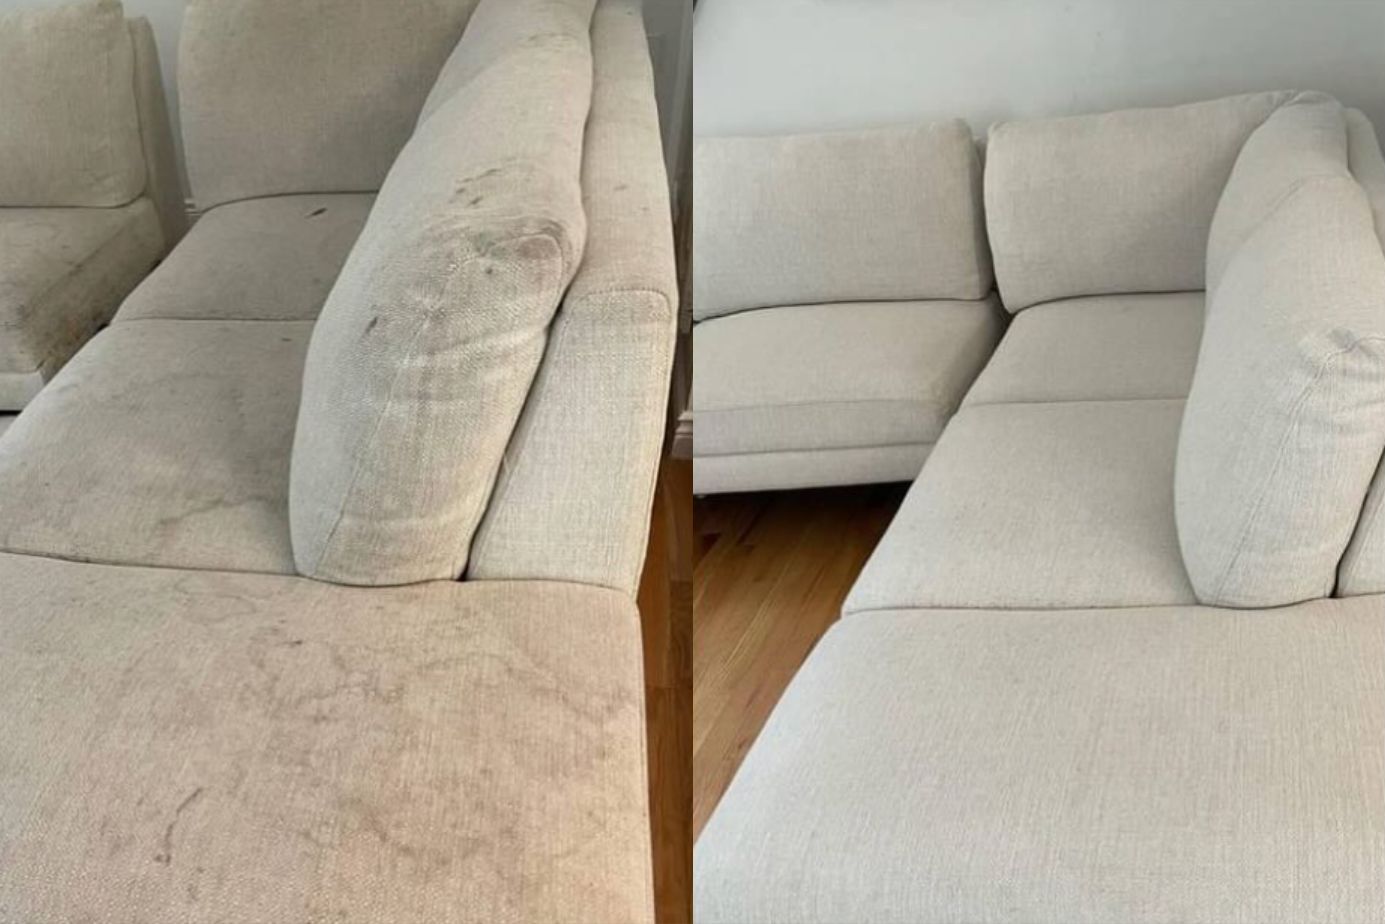 Sofa Cleaning Service Image